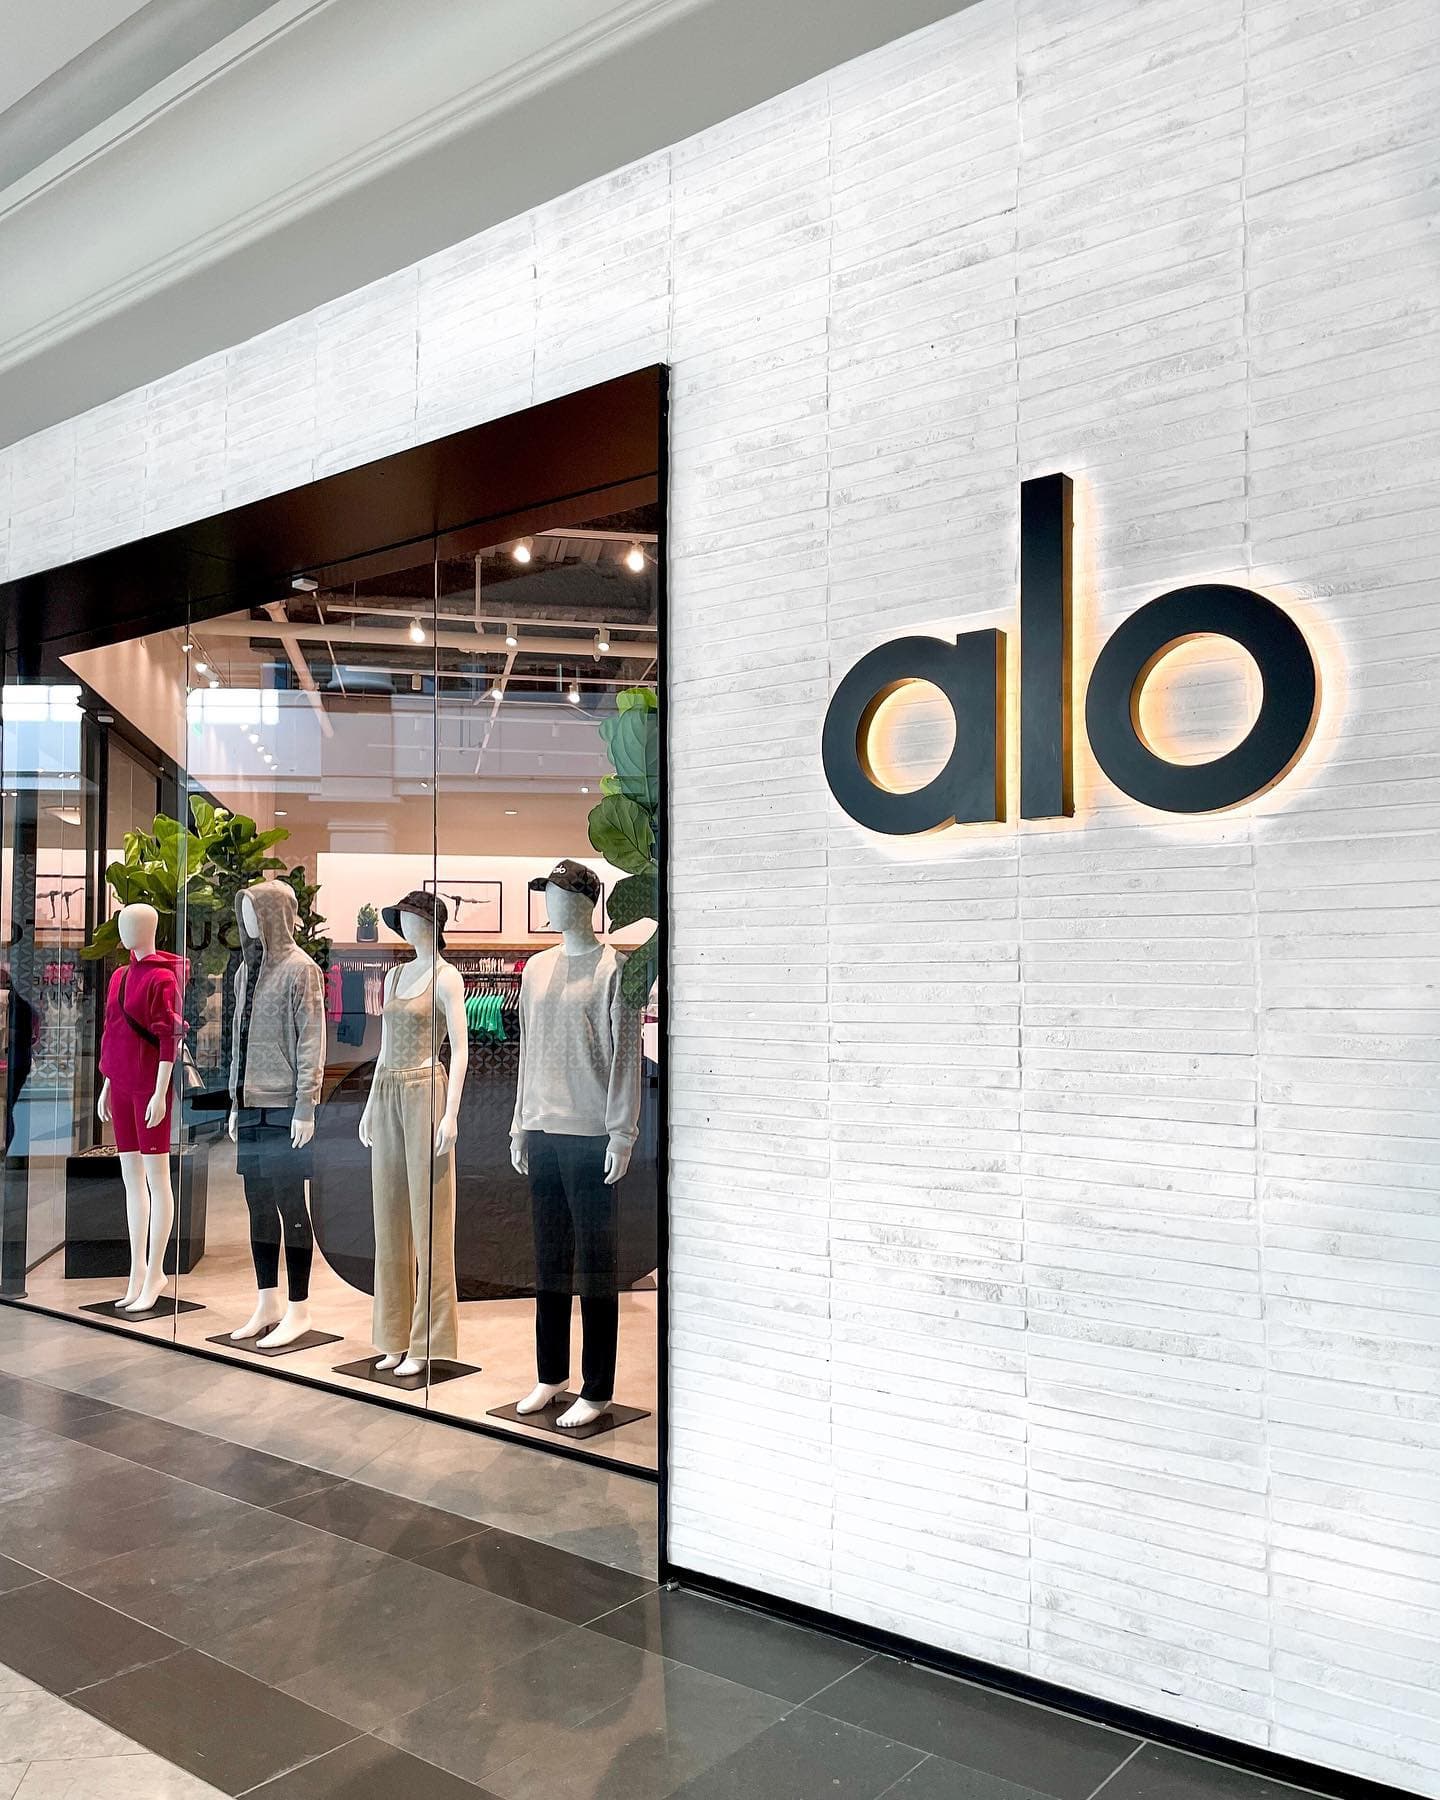 Alo Yoga Is Opening Its First Restaurant